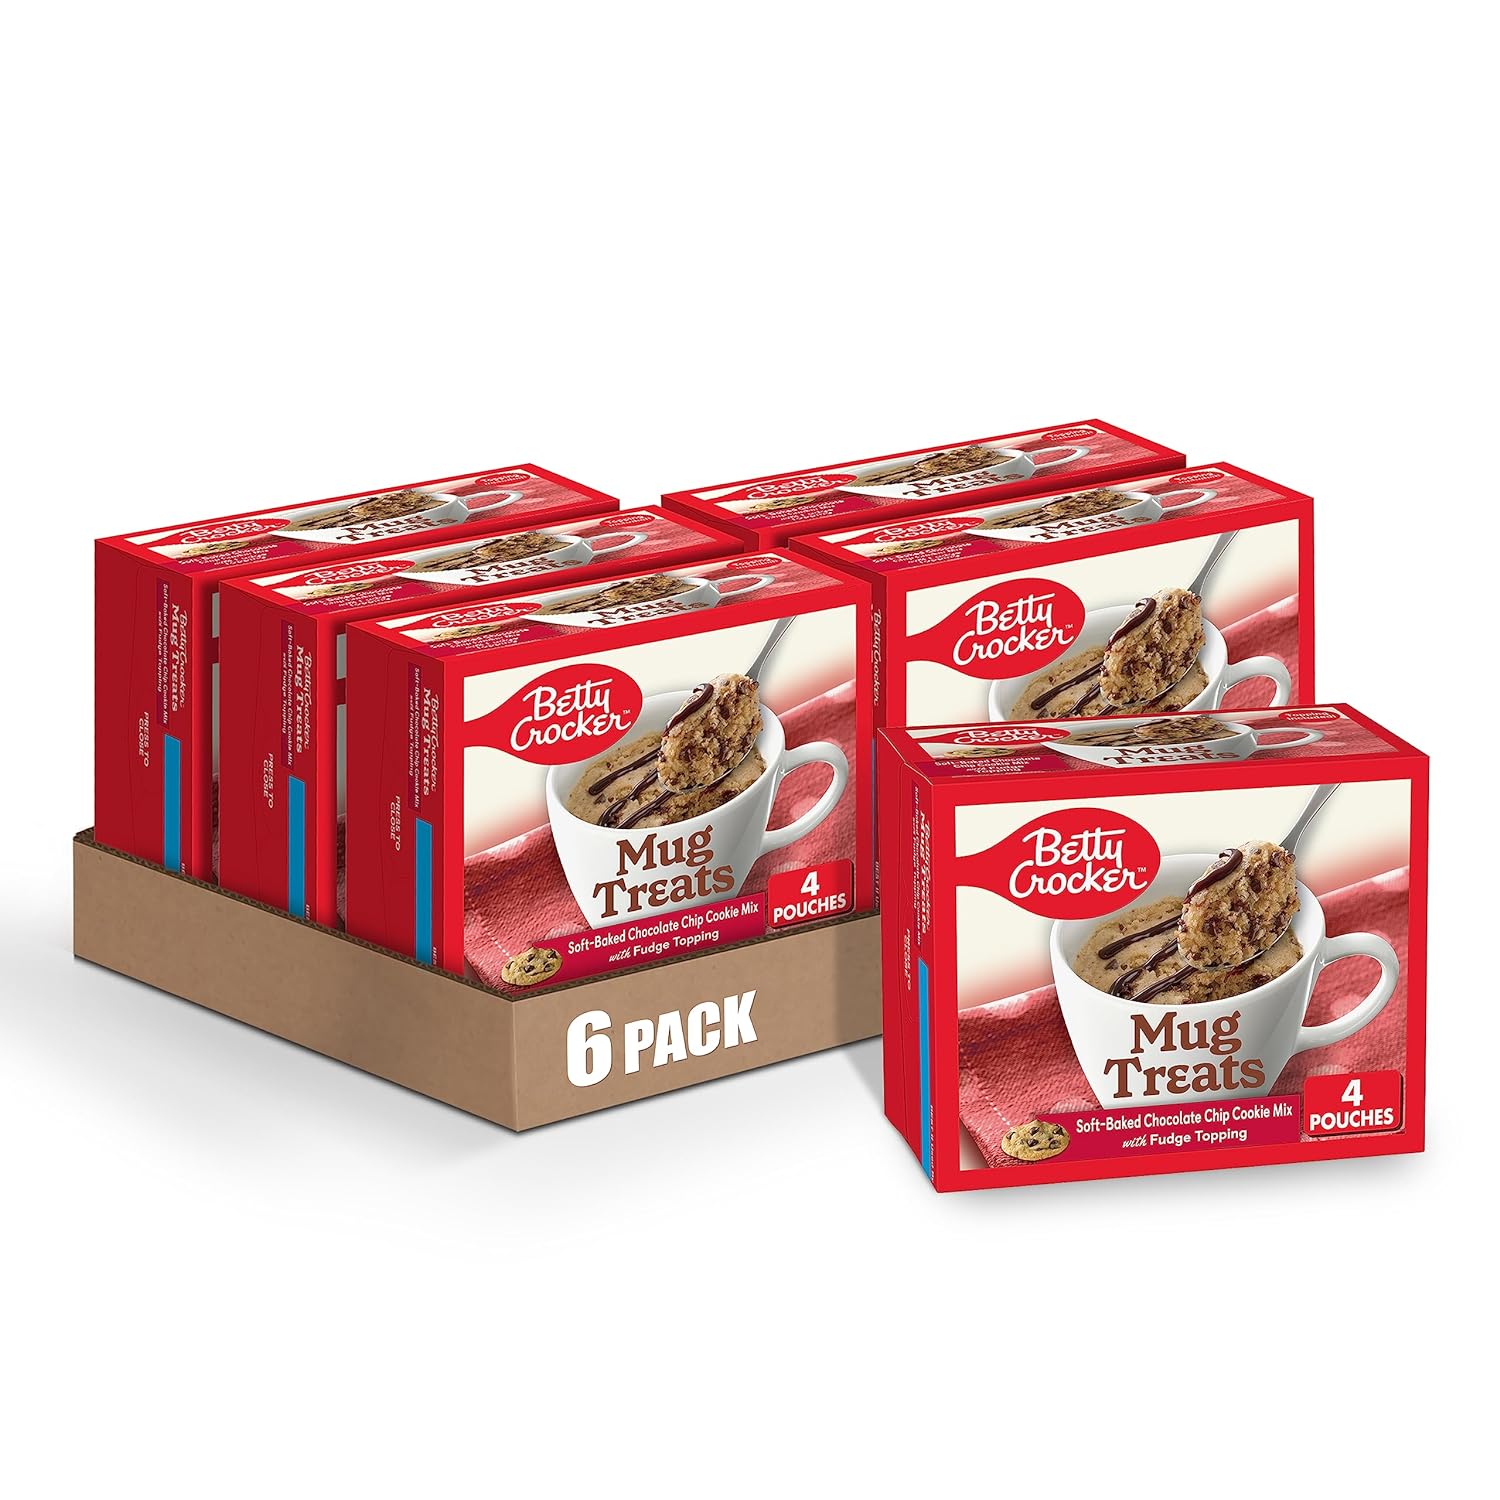 Betty Crocker Mug Treats Soft-Baked Chocolate Chip Cookie Mix with Fudge Topping, 4 Servings (Pack of 6)